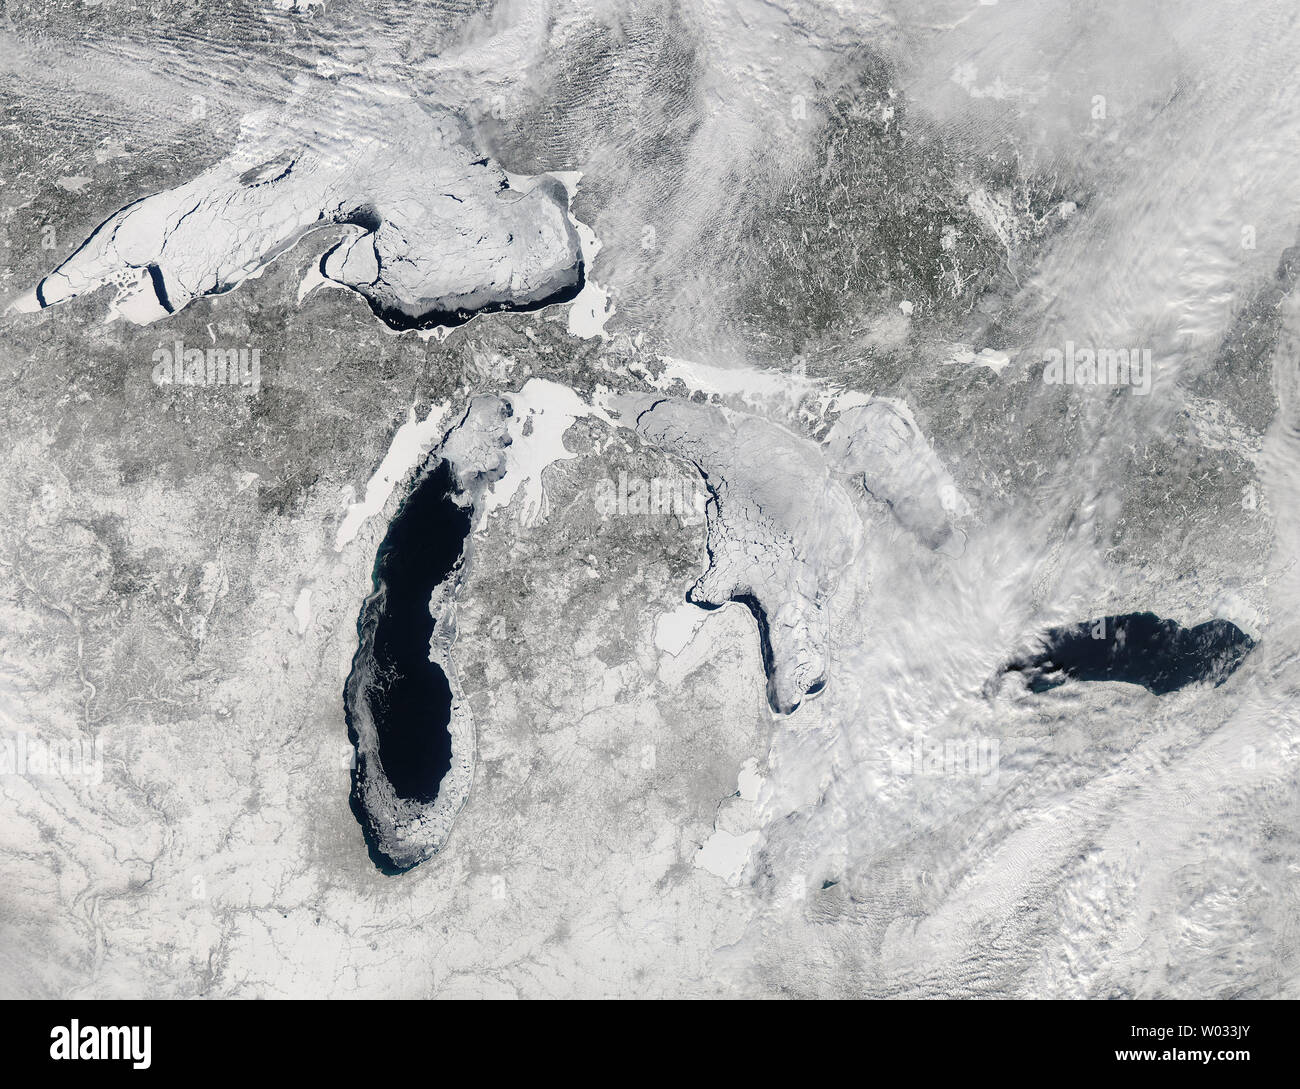 This NASA image taken on February 19, 2014 by the the Moderate Resolution Imaging Spectroradiometer (MODIS) aboard NASAÕs Aqua satellite shows the Great Lakes 80% frozen over during one of the hardest freeze-ups in four decades. North AmericaÕs Great Lakes peaked at 88.42% on February 12-13 C a percentage not recorded since 1994. The ice extent has surpassed 80% just five times in four decades. The average maximum ice extent since 1973 is just over 50%. UPI/NASA Stock Photo